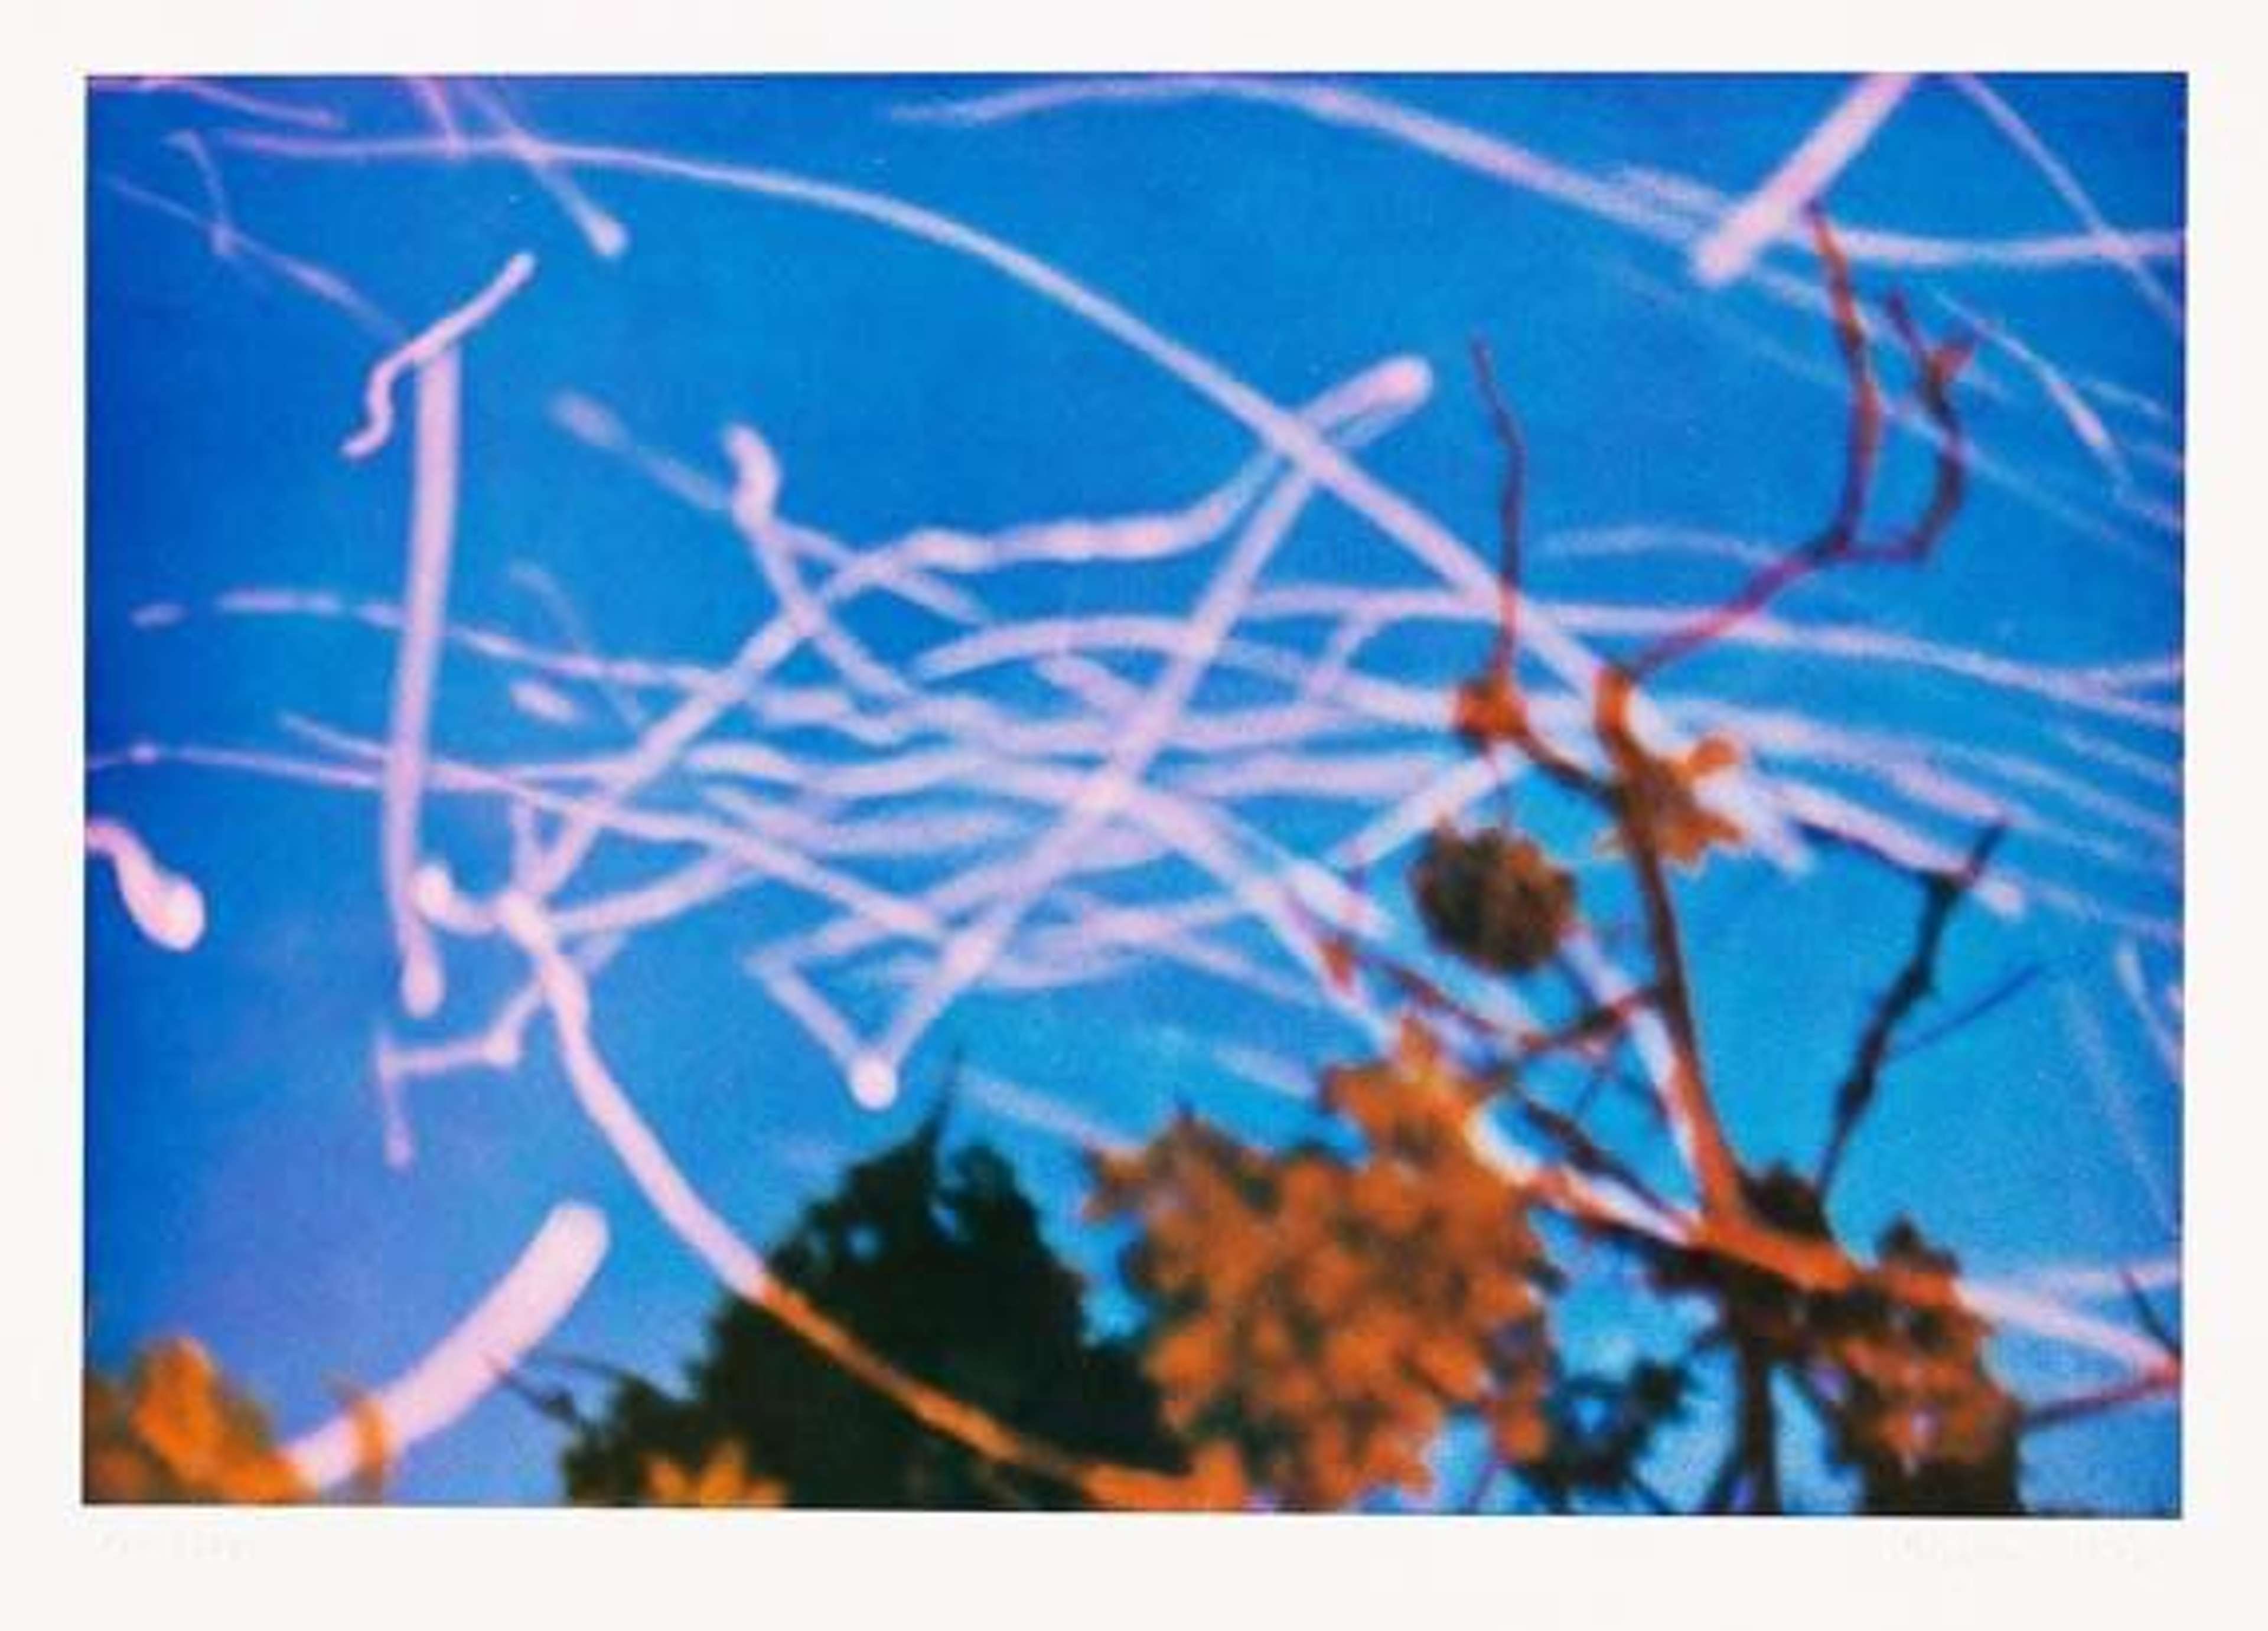 Lithograph by Gerhard Richter depicting the blurred silhouettes of warm-toned trees against a bold blue sky. Over the top of the scenery are white translucent squiggly lines which resemble light leaks or sparks.